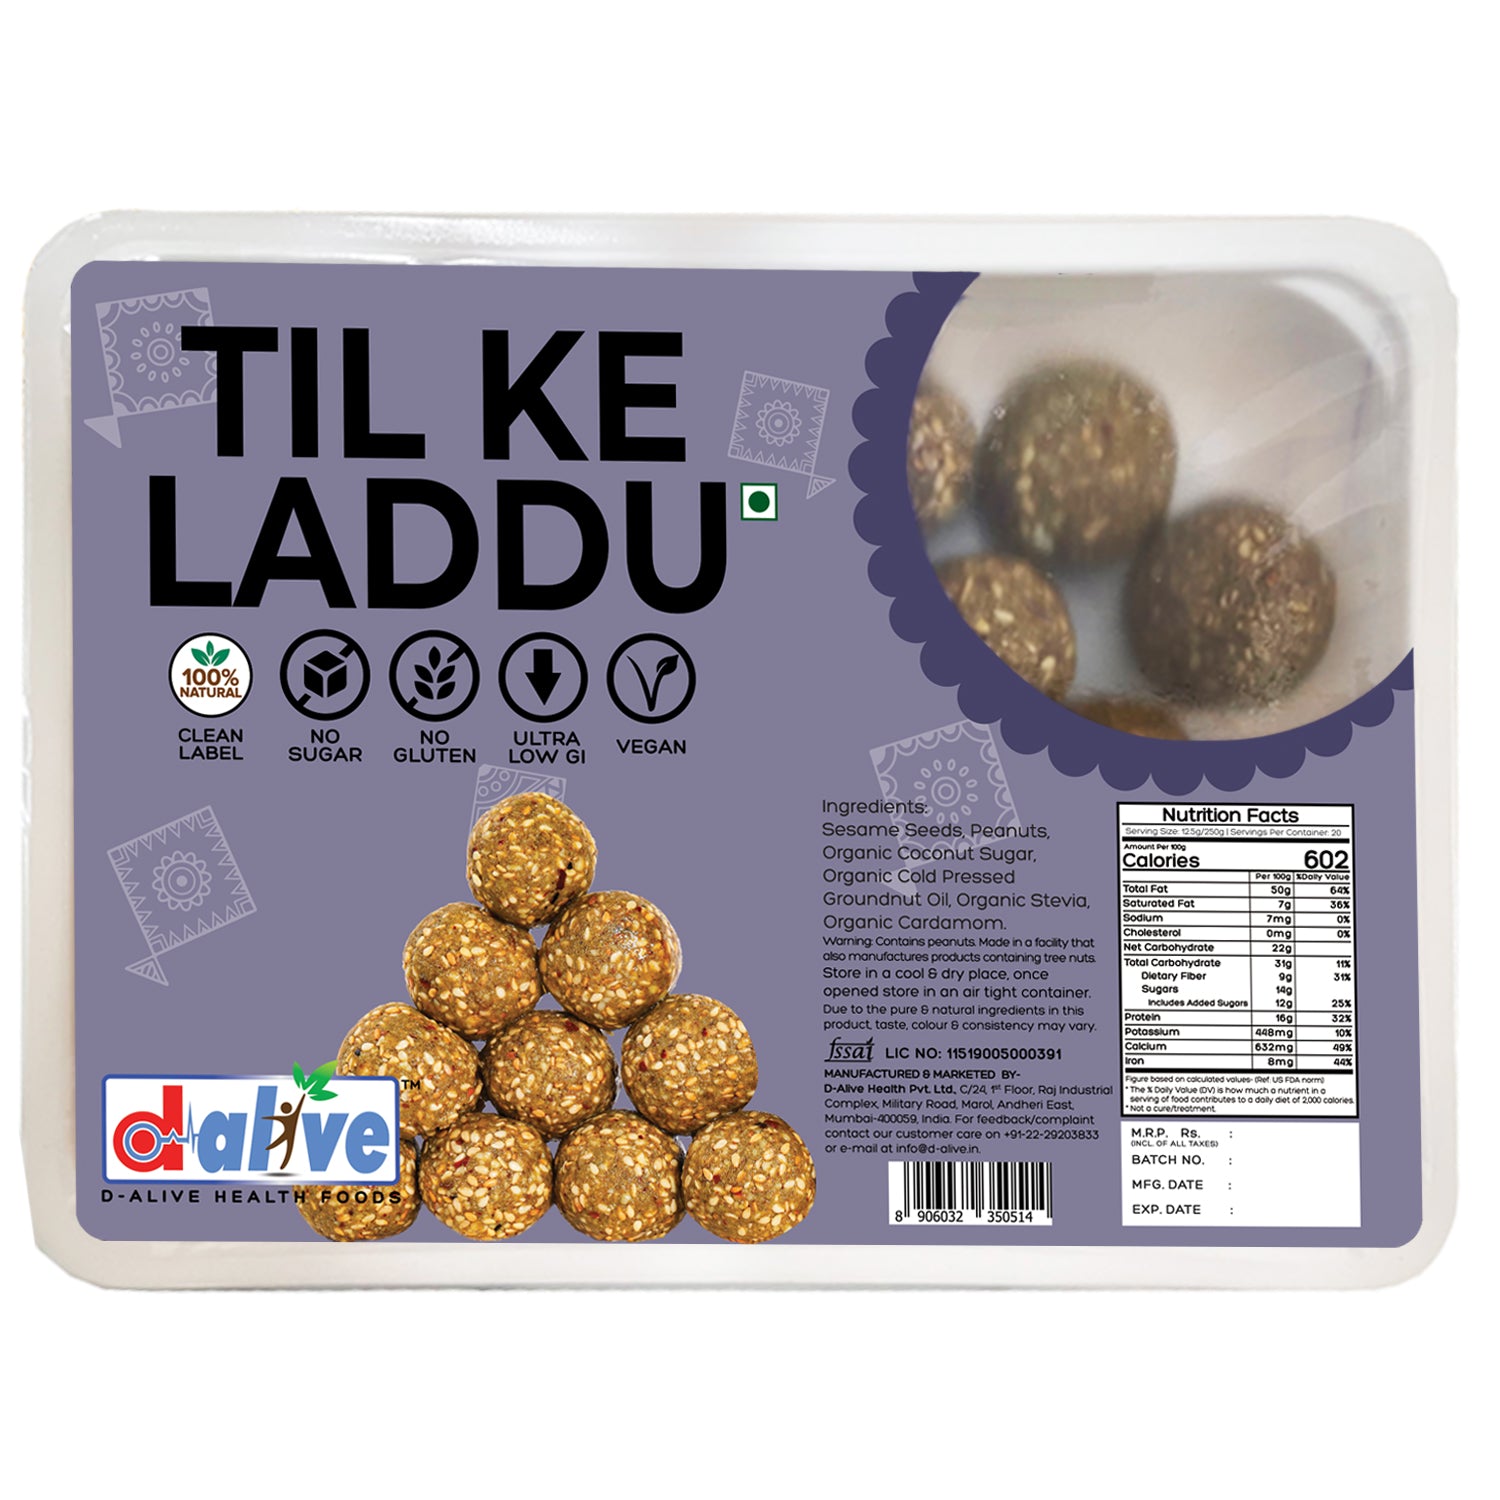 D-Alive TIL KE LADDU, Indian Sweets, Mithai - 250g (20 Servings) - (Sugar-Free, Organic, Gluten-free, Low Carb, No Preservatives, Non-GMO, Keto and Diabetes friendly)